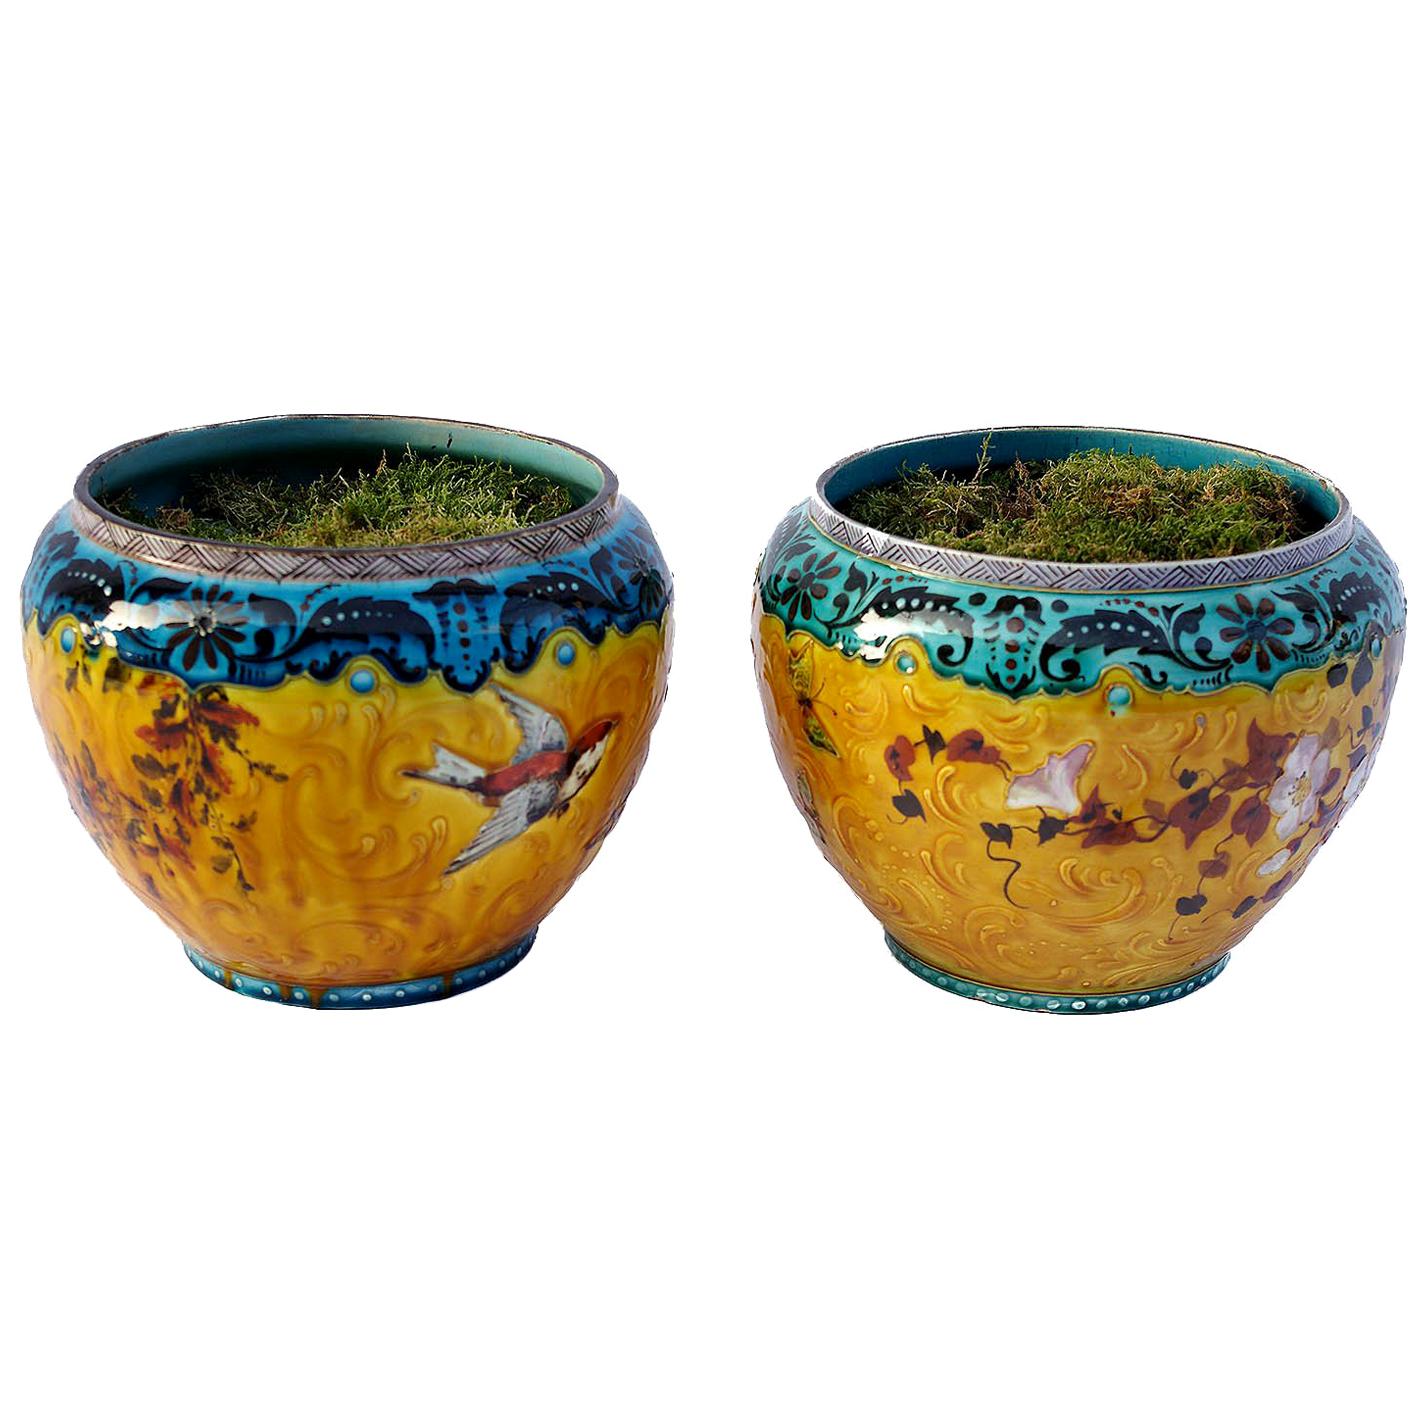 Théodore Deck, Pair of Yellow and Blue Porcelain Planter, 19th Century